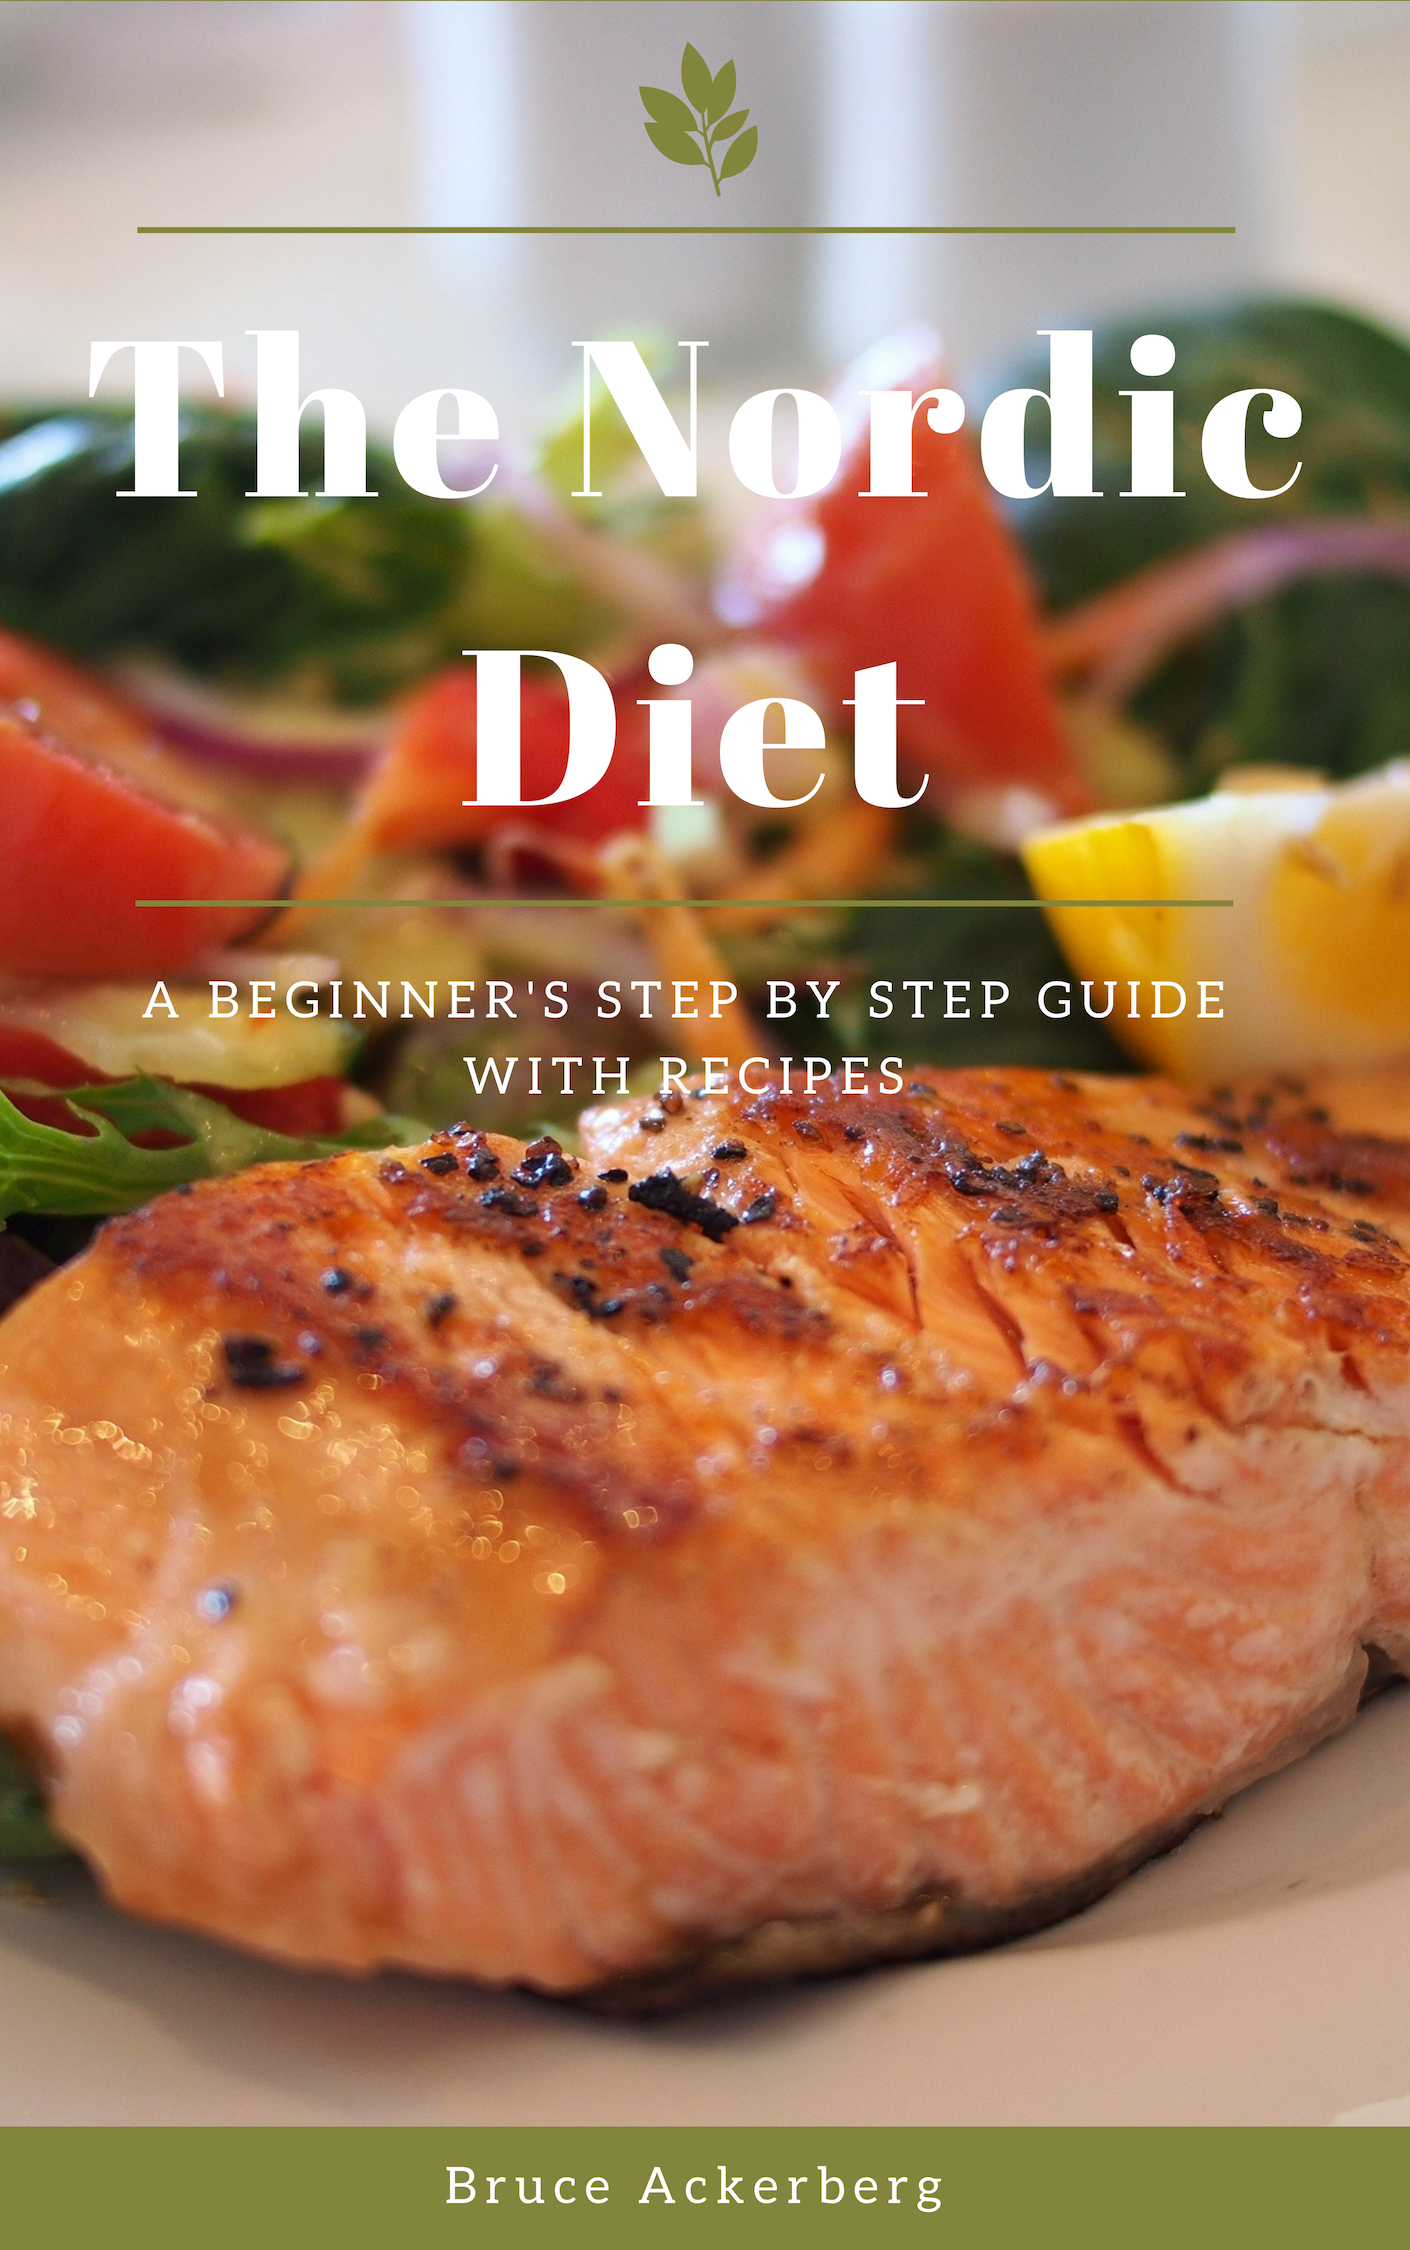 FREE: The Nordic Diet: A Beginner’s Step-by-Step Guide with Recipes by Bruce Ackerberg